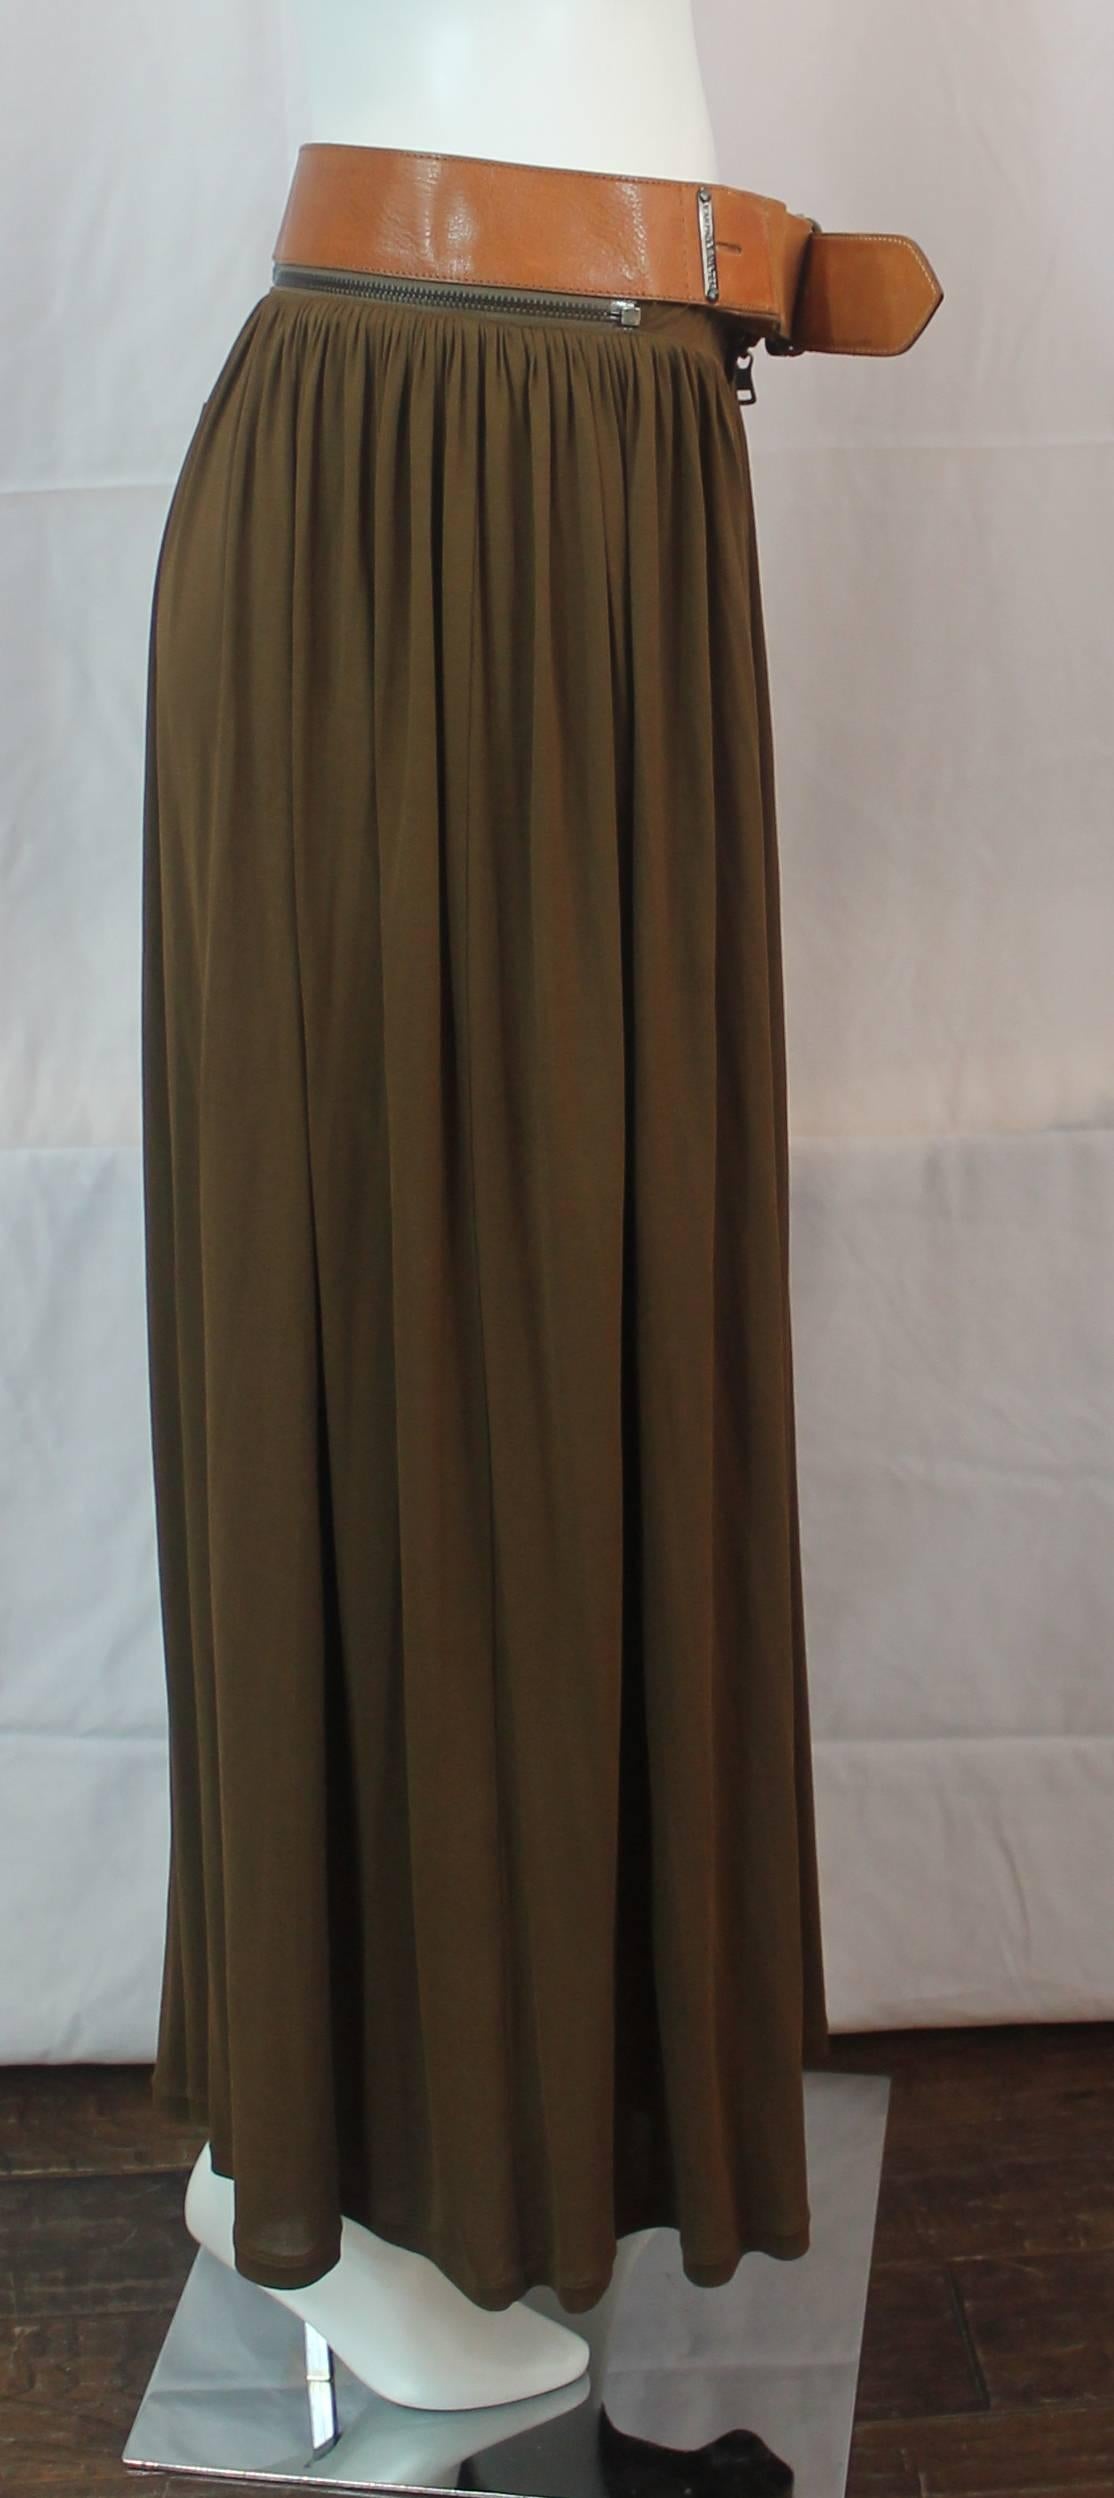 Black Jean Paul Gaultier Brown Jersey Maxi Wrap Skirt with Luggage Leather Belt - 8